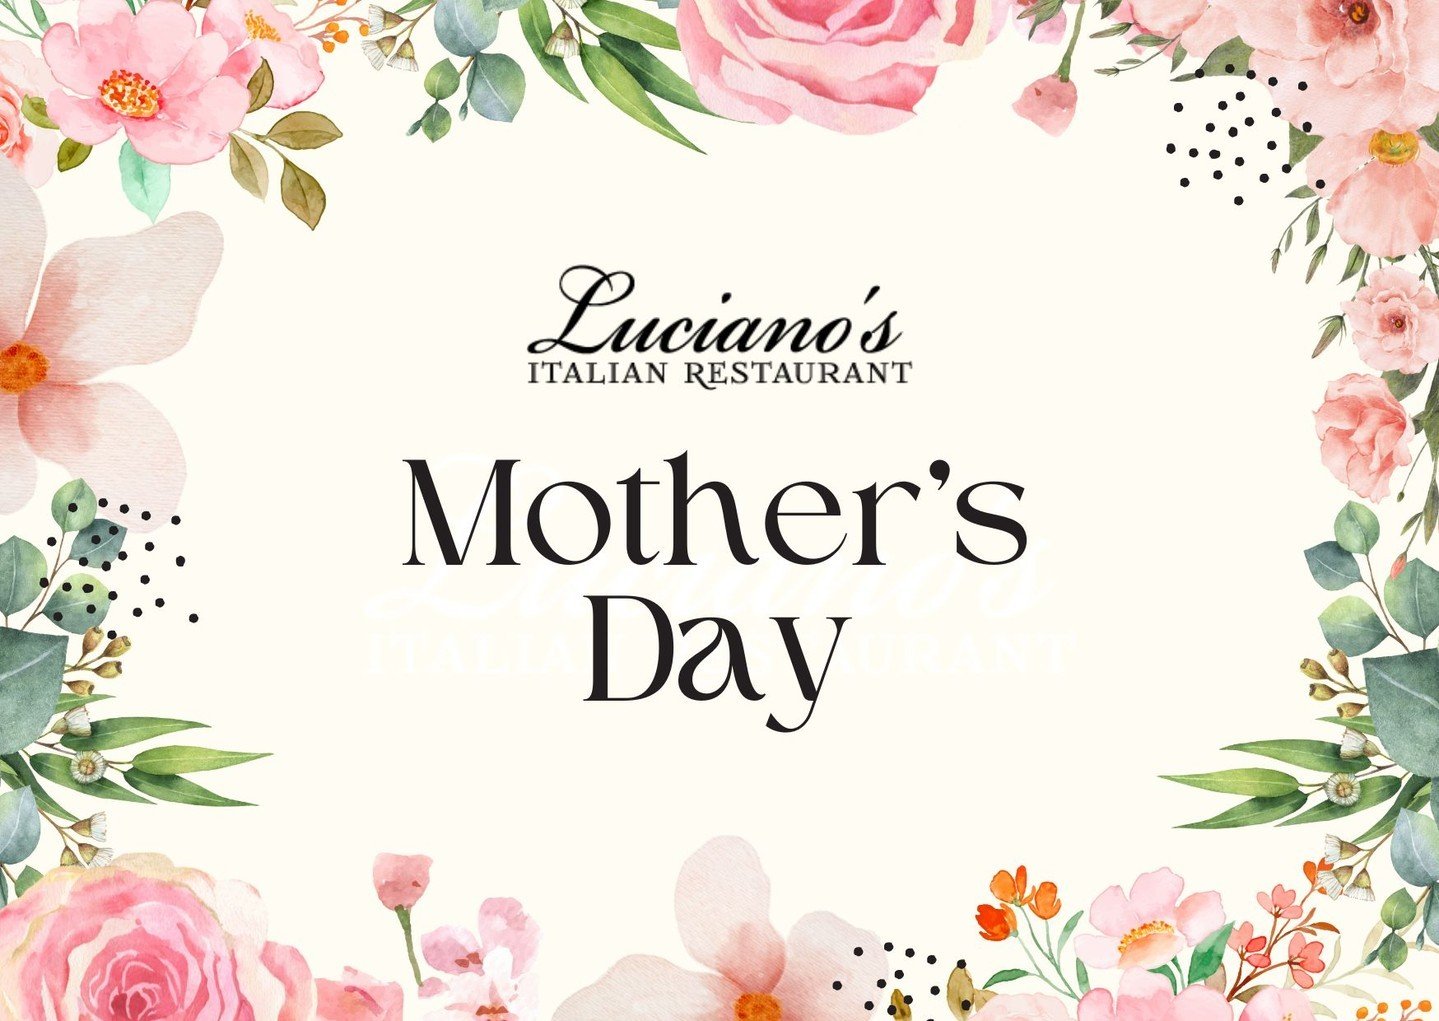 Spoil Mom this Mother's Day with our specially crafted menu. Book your table now and give her the celebration she deserves!

Reservations: (586) 263-6540

Menu Details: https://static1.squarespace.com/.../17106.../Mothers+day.pdf